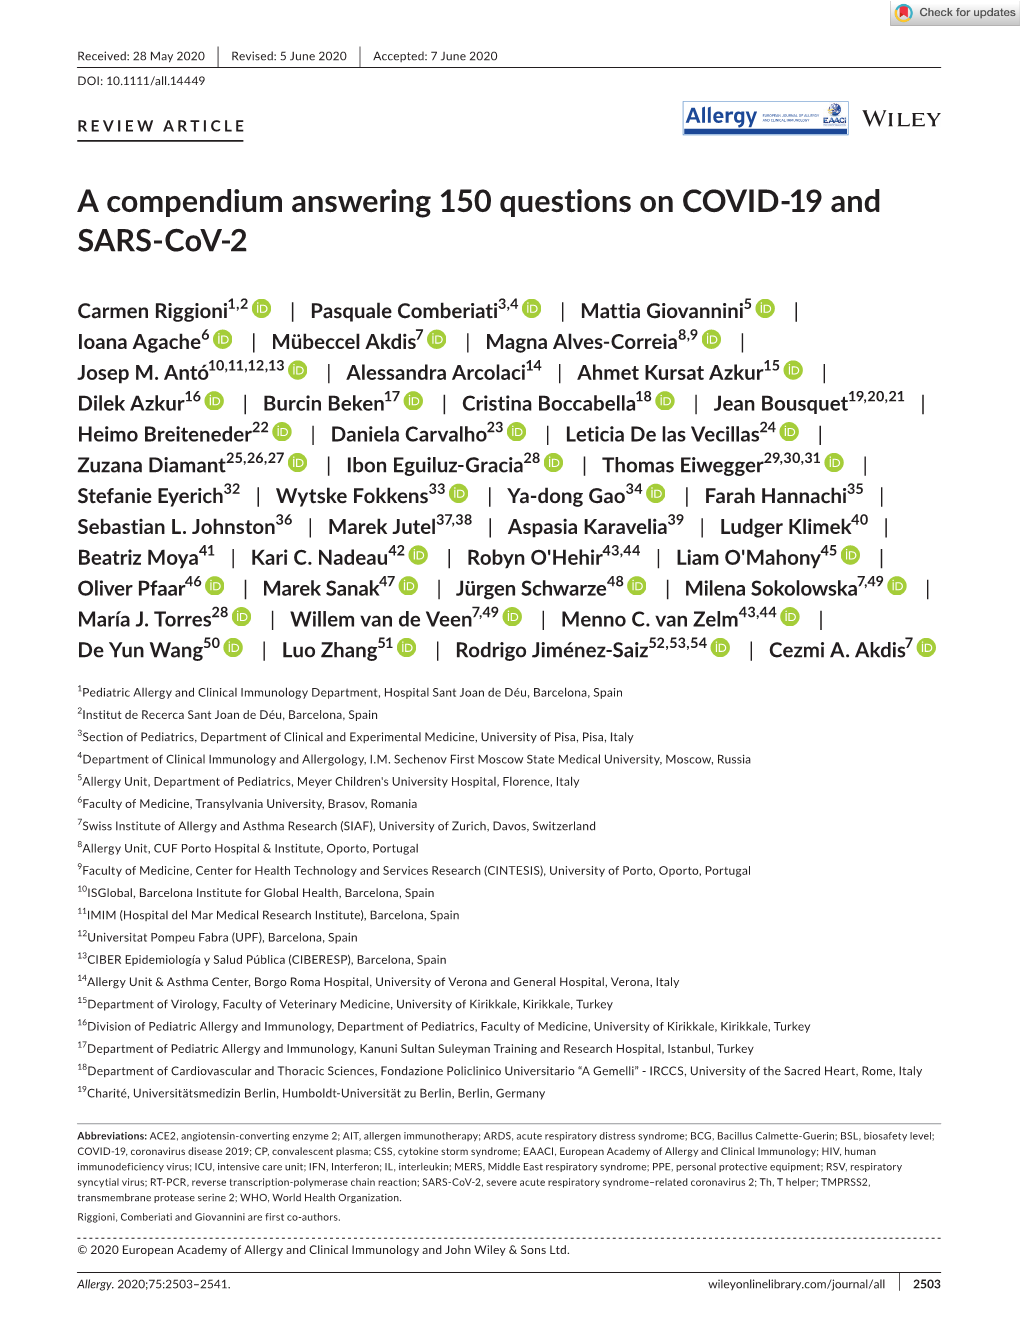 A Compendium Answering 150 Questions on COVID‐19 and SARS